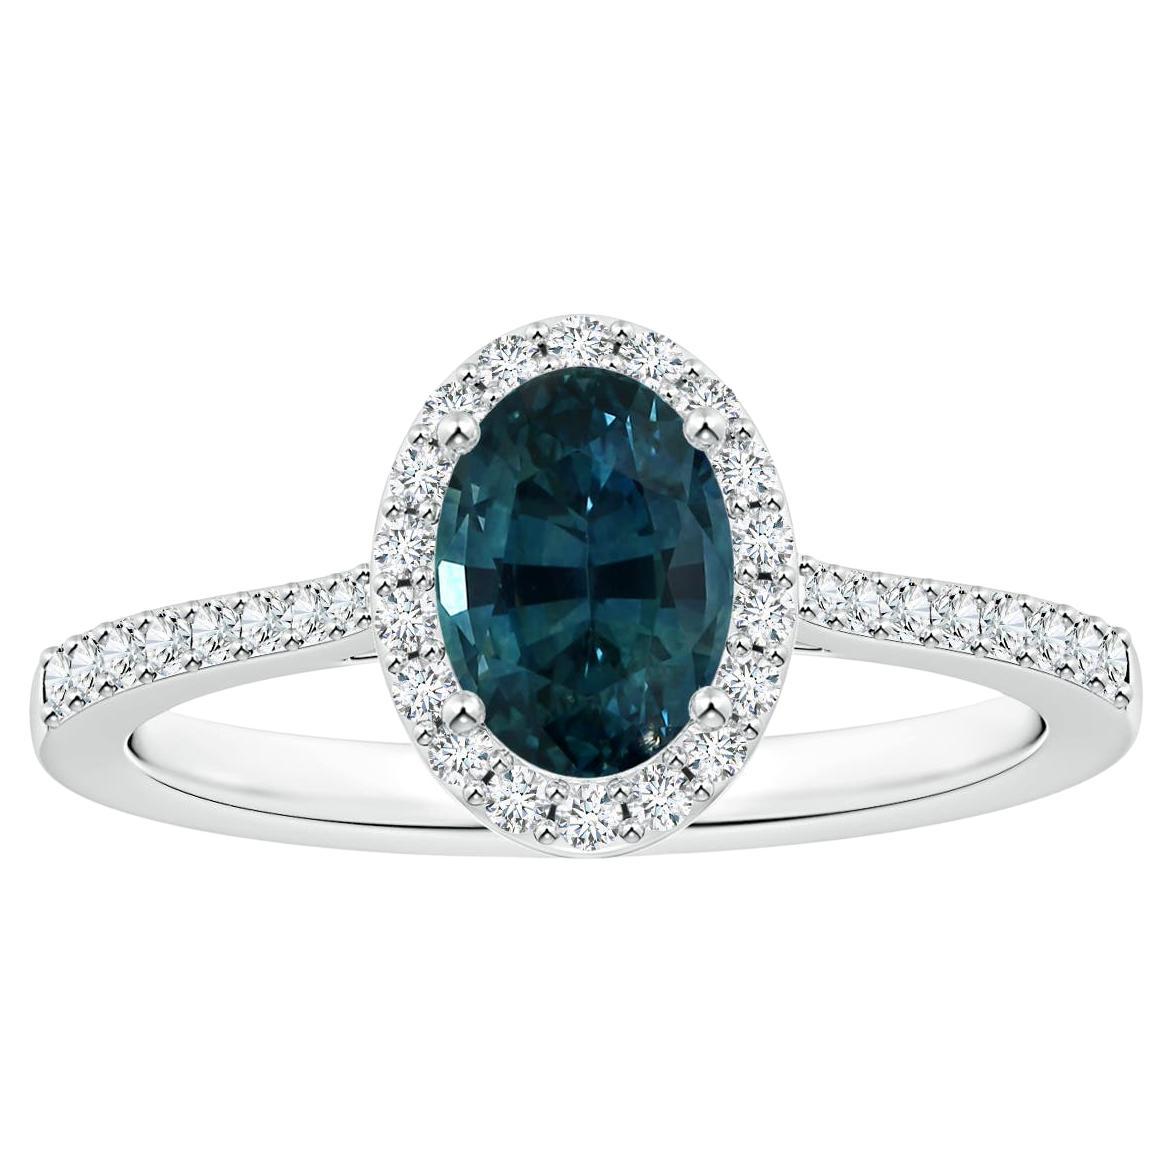 For Sale:  ANGARA GIA Certified Natural Teal Sapphire Ring in White Gold with Halo